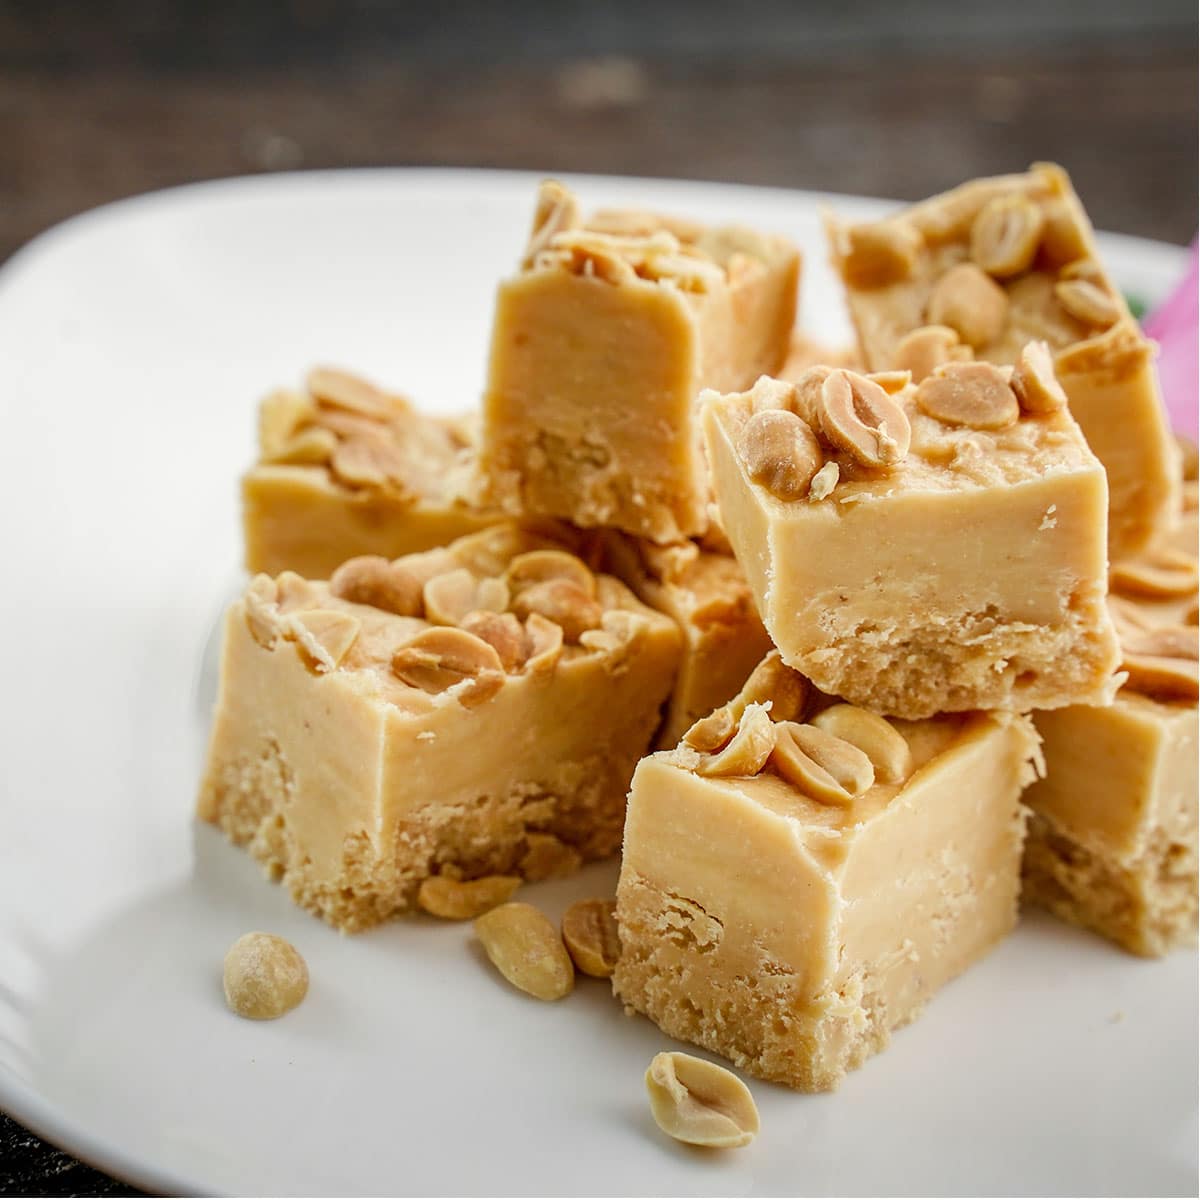 A dessert with a crunch, are these Peanut Butter Fudge bites.